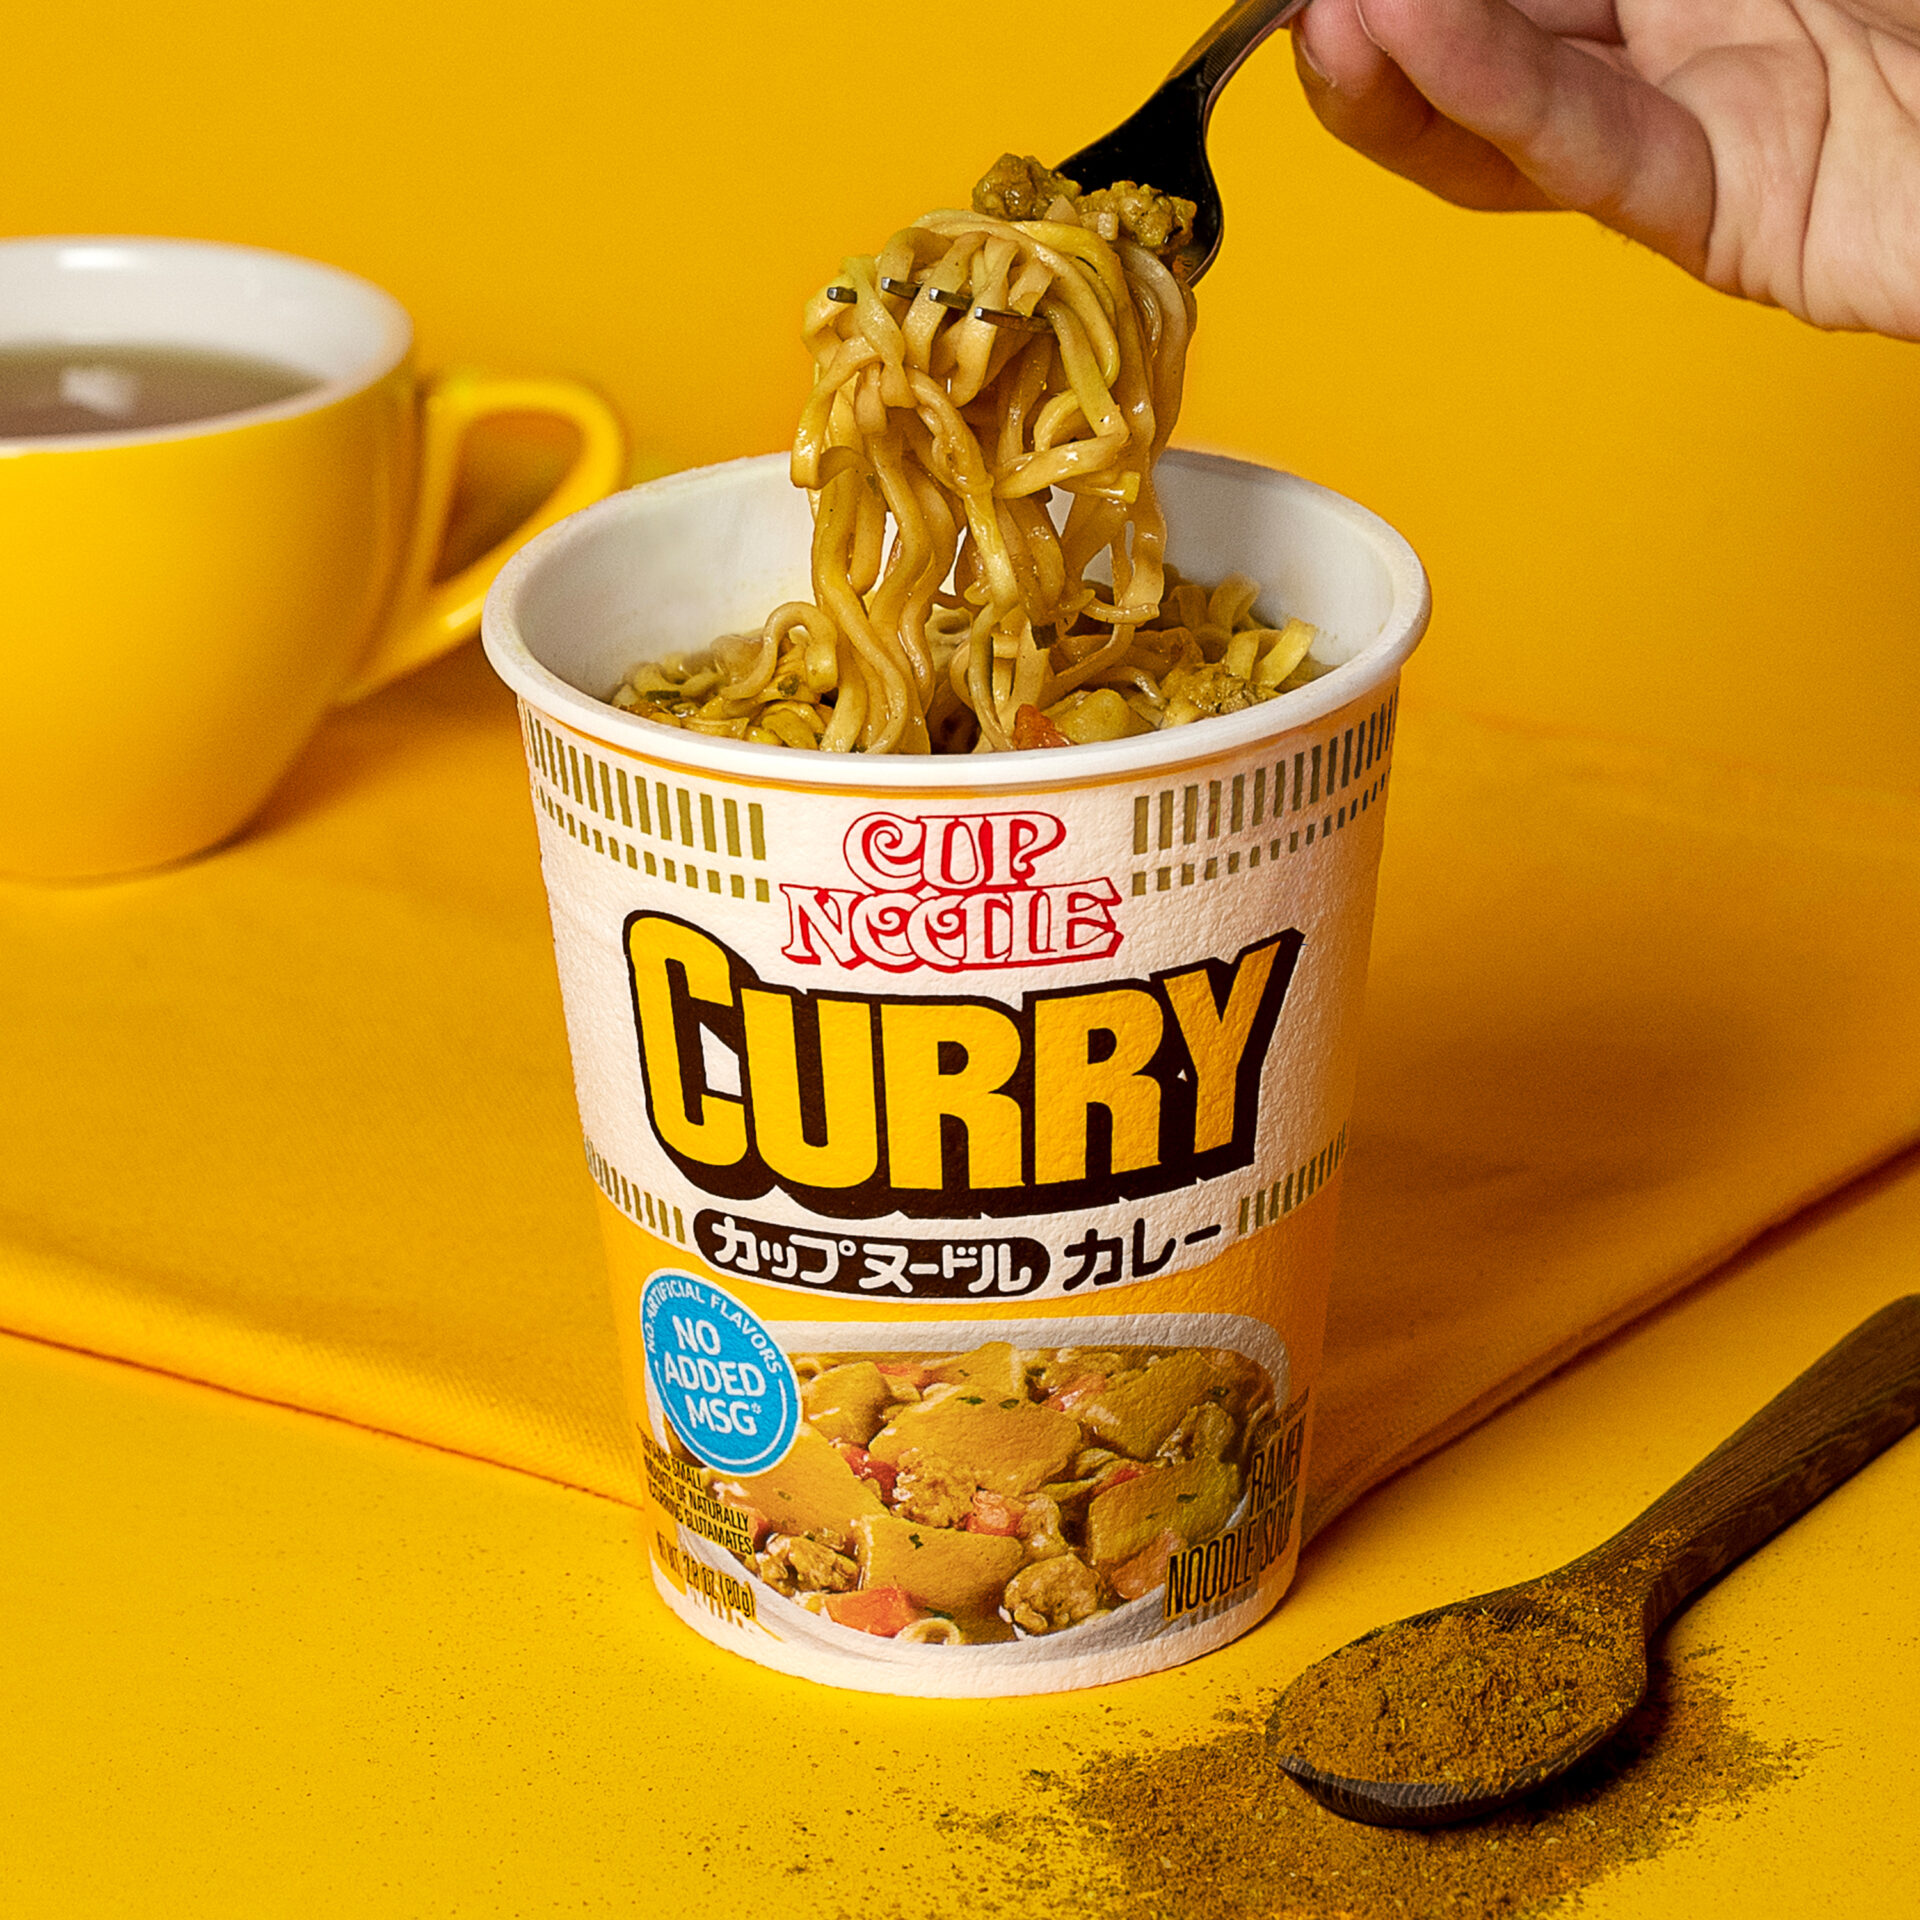 https://www.nissinfoods.com/wp-content/uploads/2023/03/23_NISSIN_Content_Product_CN_Global_Curry_SM_X1_0188_retouched_R1V1_3000x3000.jpg